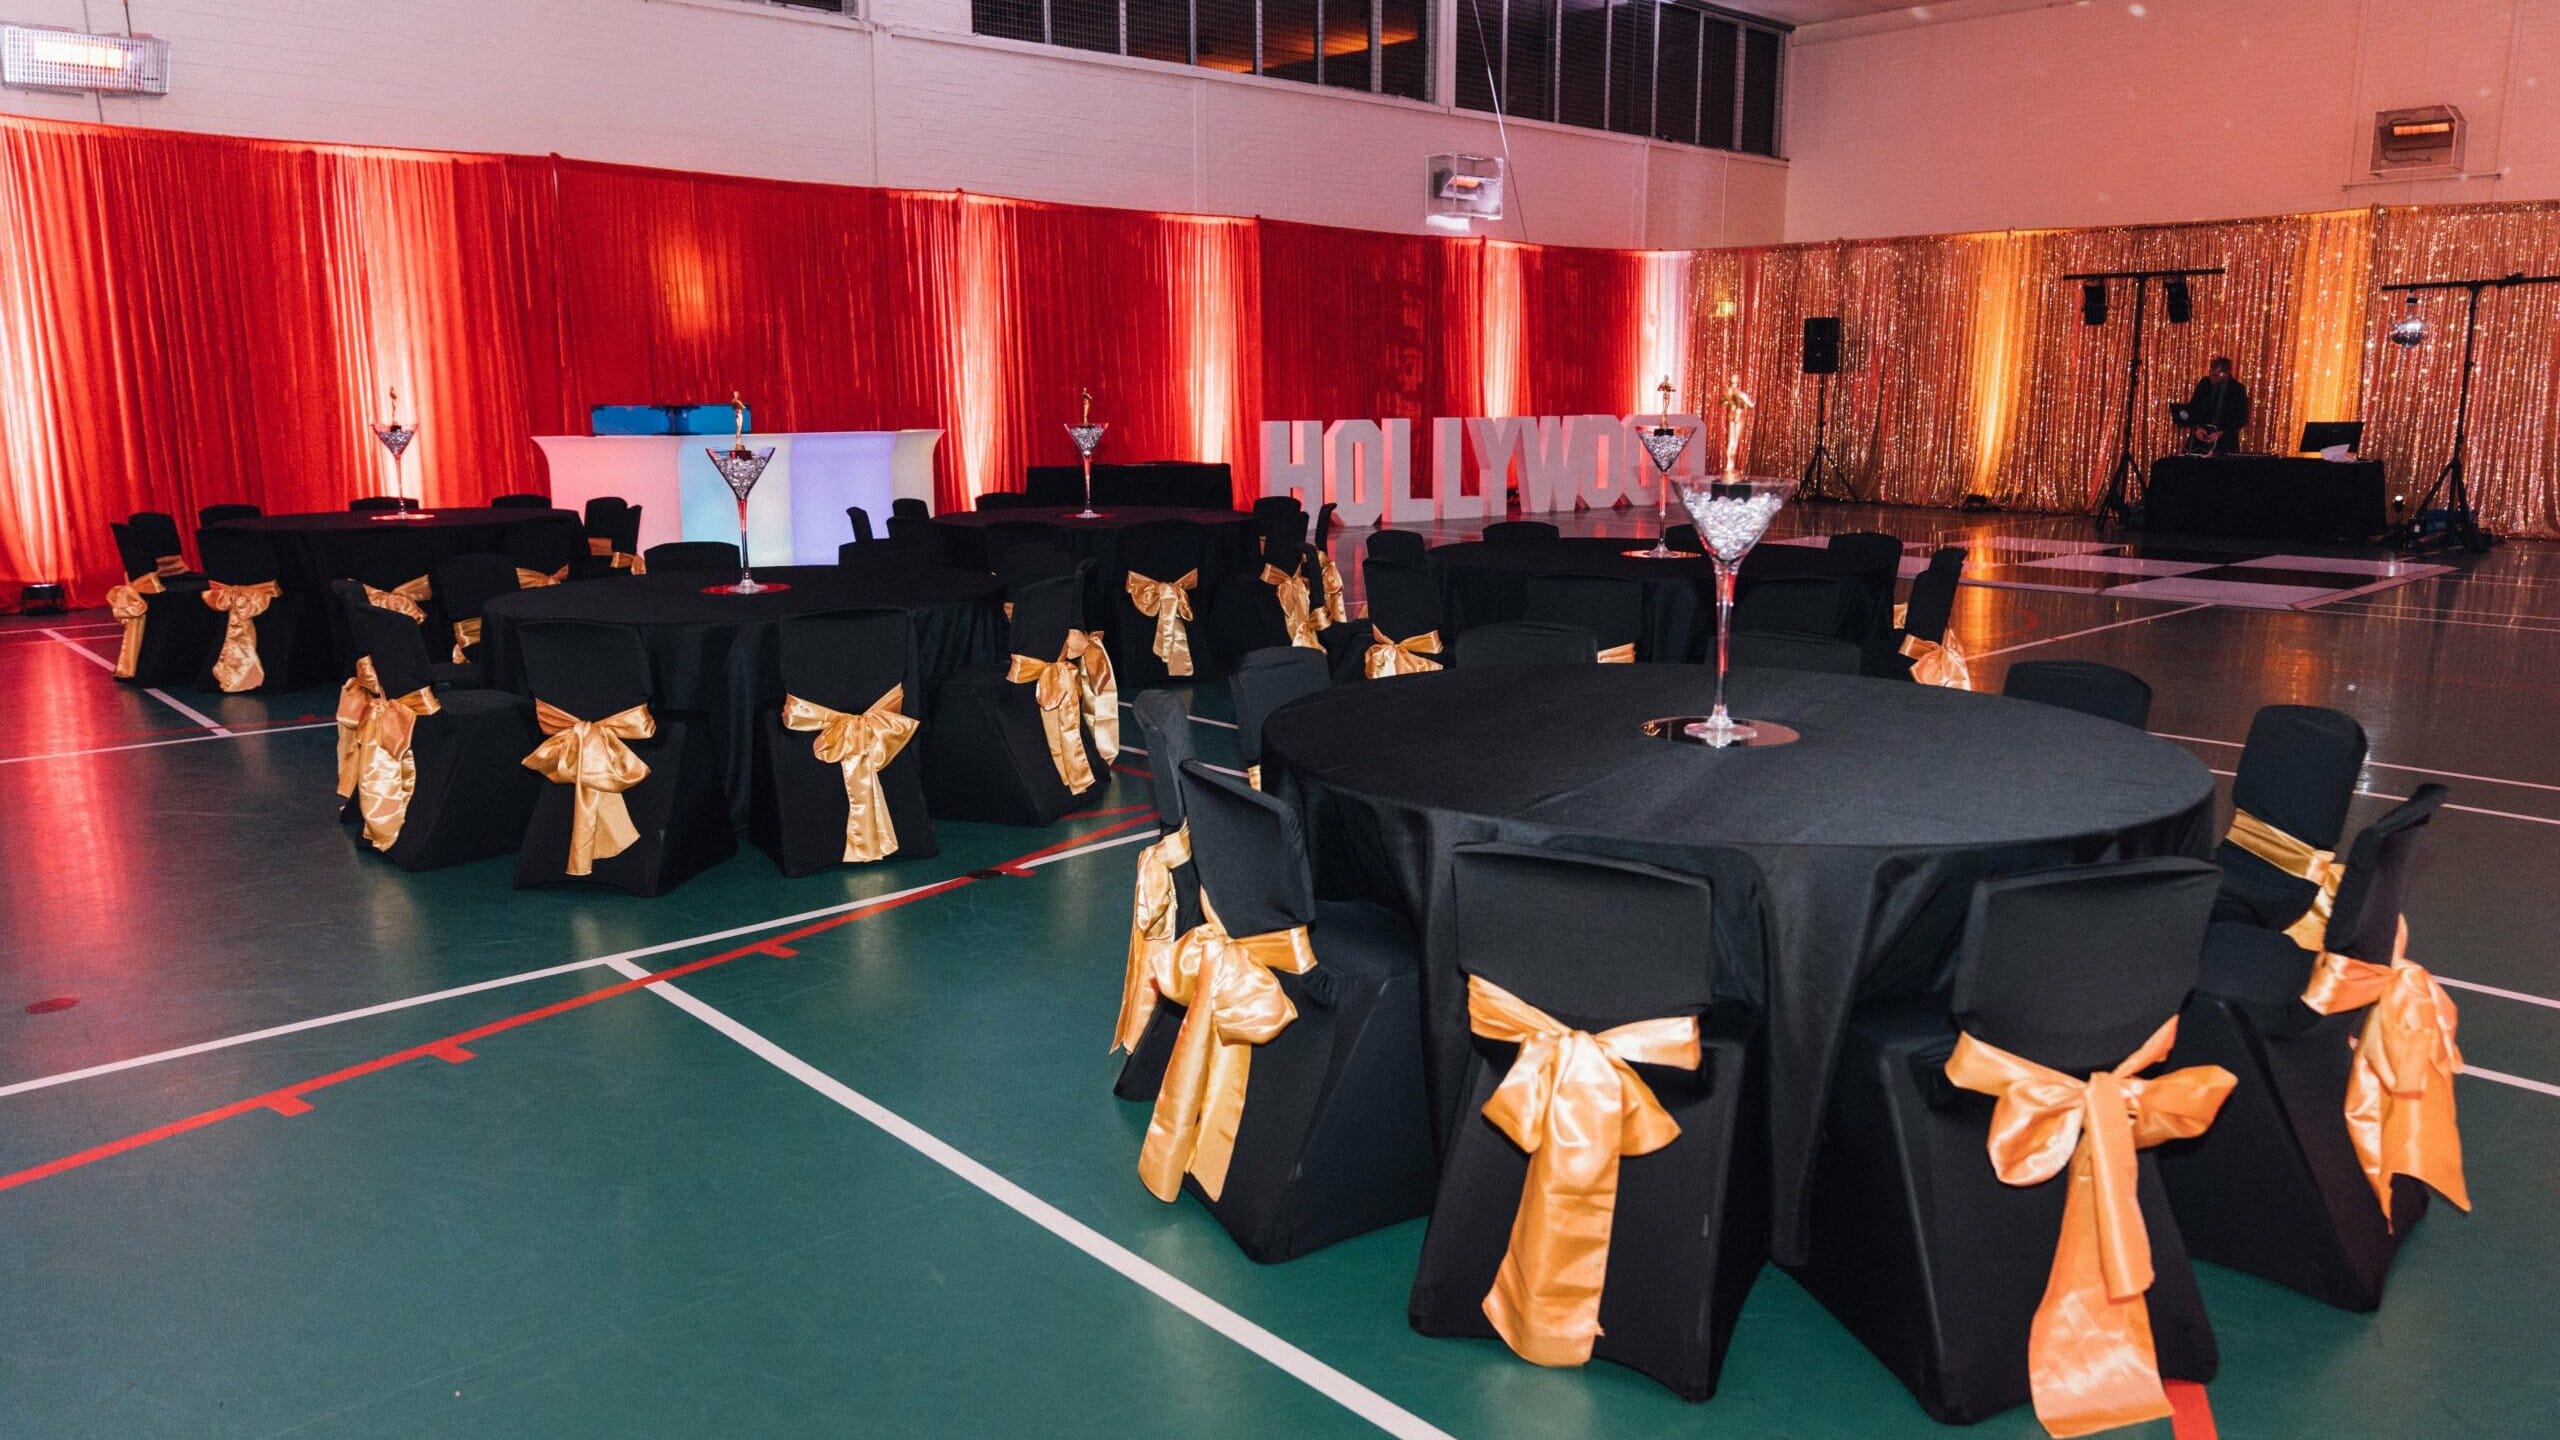 hollywood themed 21st birthday party setup with dining table